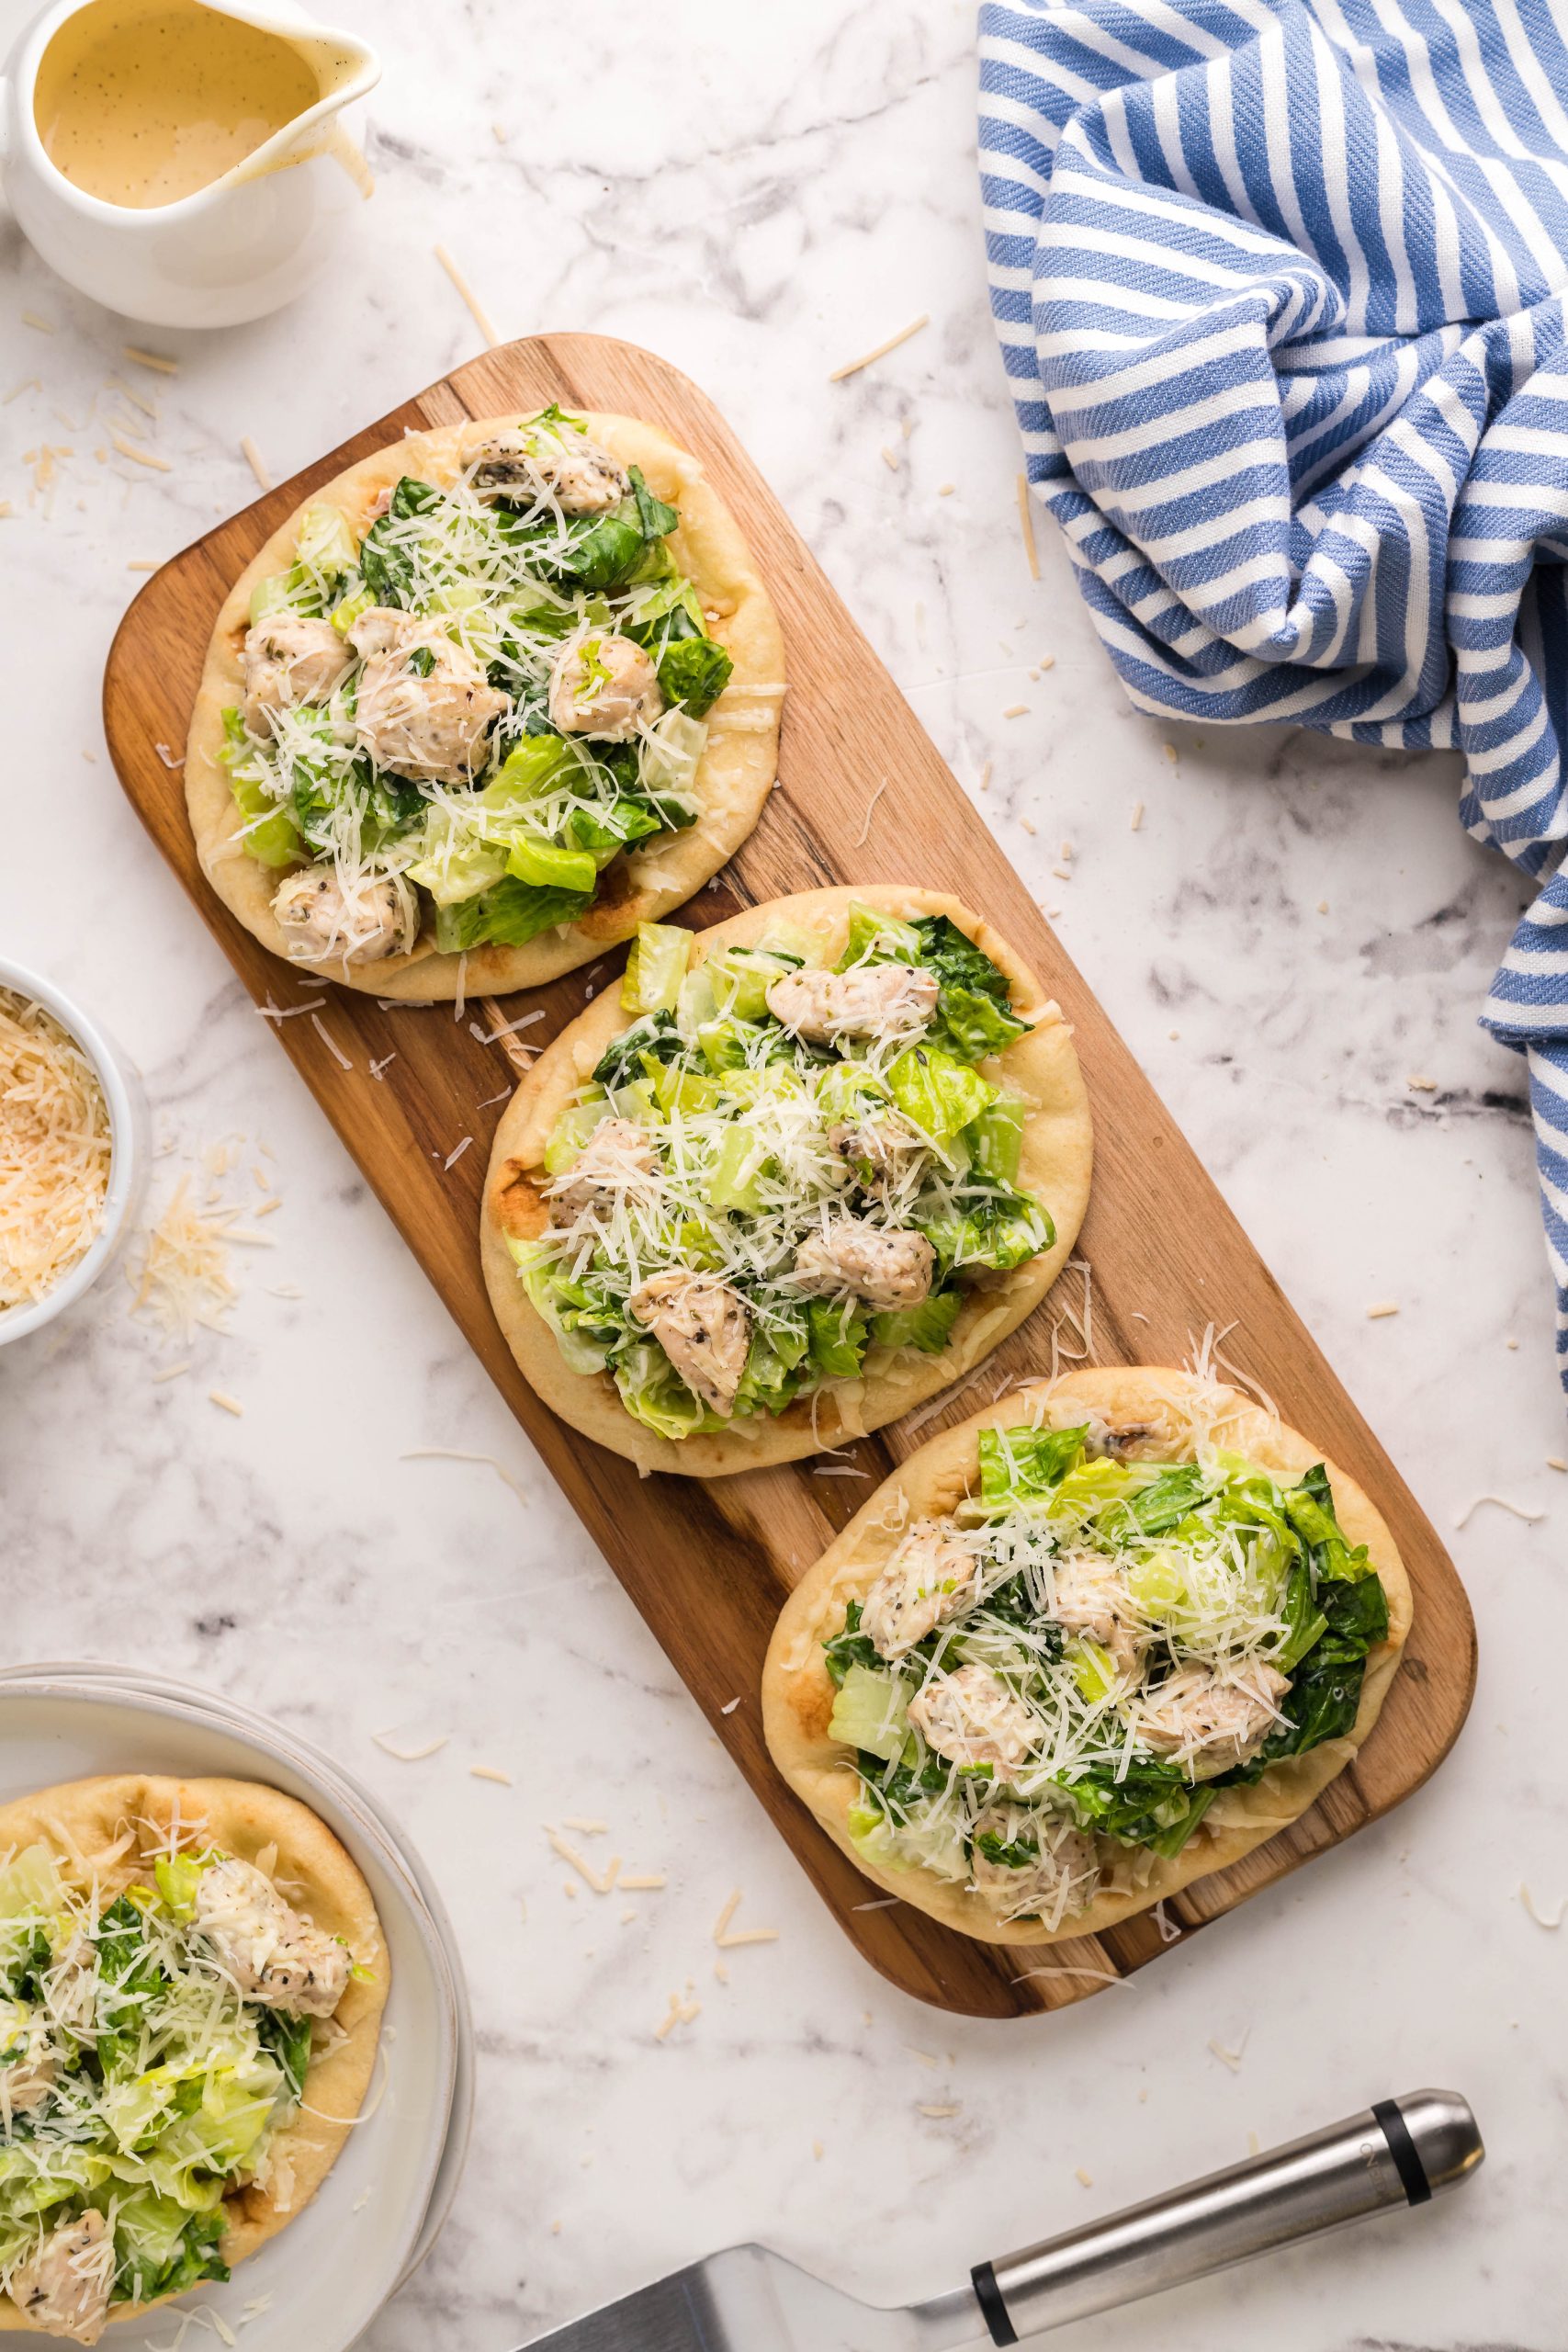 20 Minute Chicken Caesar Flatbread is quick, easy, and totally satisfying. This recipe is super quick to pull together using store-bought flatbread, seasoned pan sauteed chicken, and your favorite Caesar salad dressing.